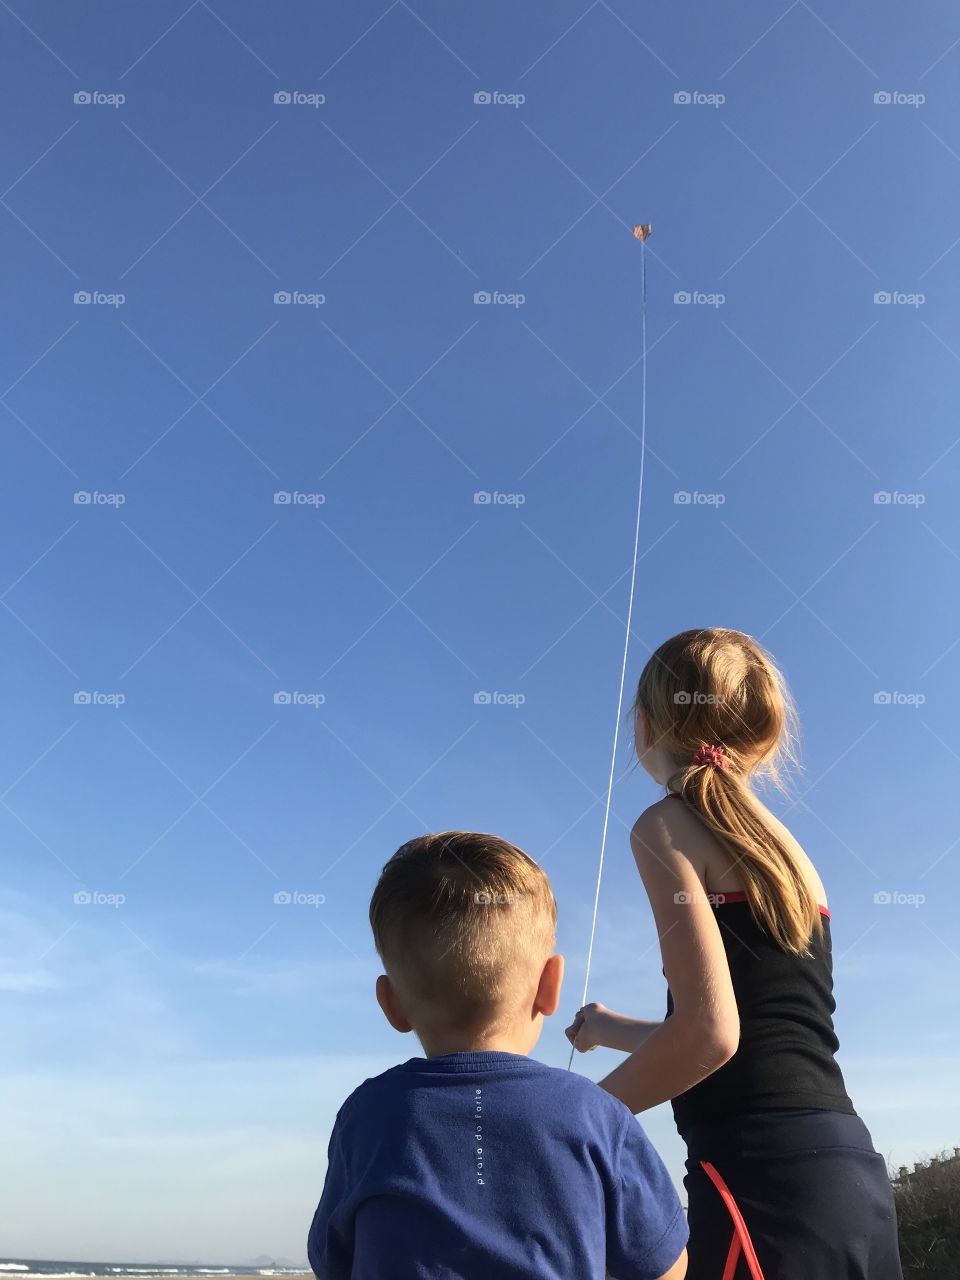 Let’s Fly a Kite